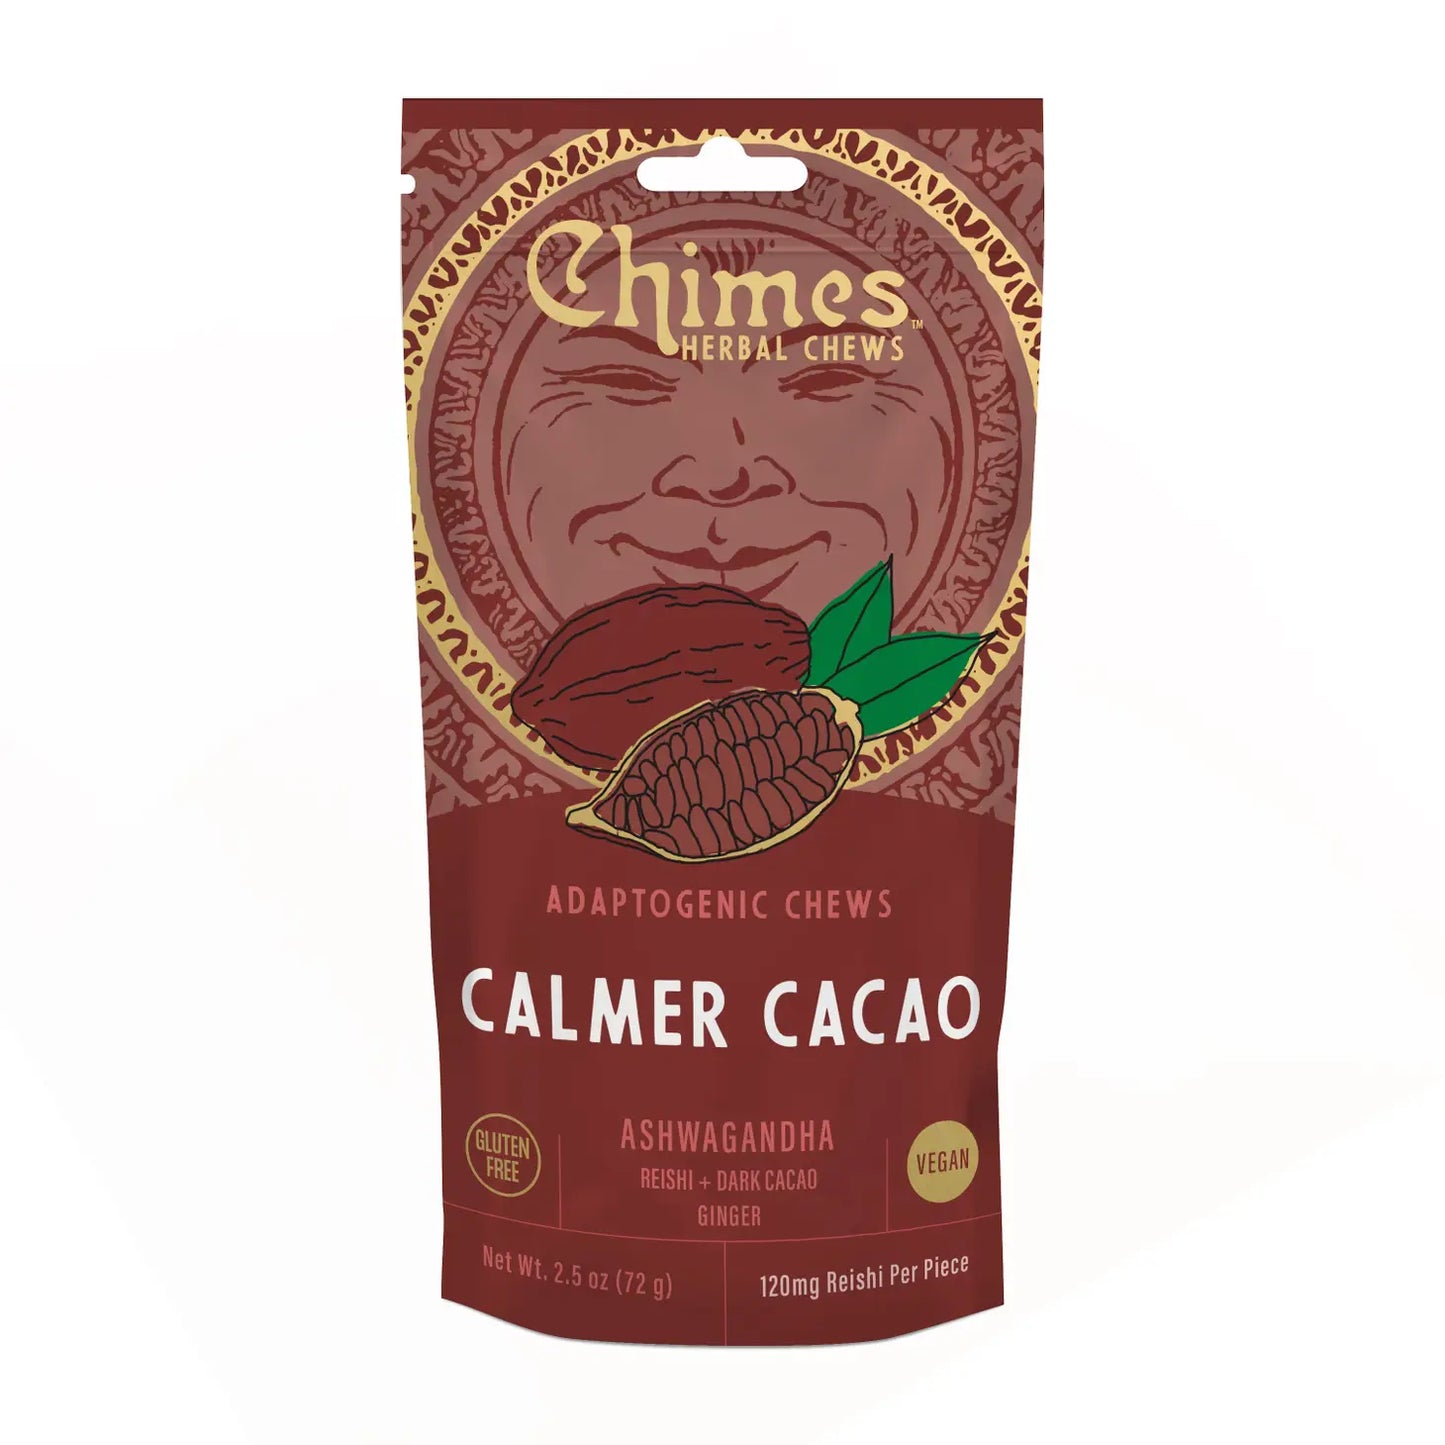 Chimes Calmer Cacao Adaptogen Ginger Chews Candy